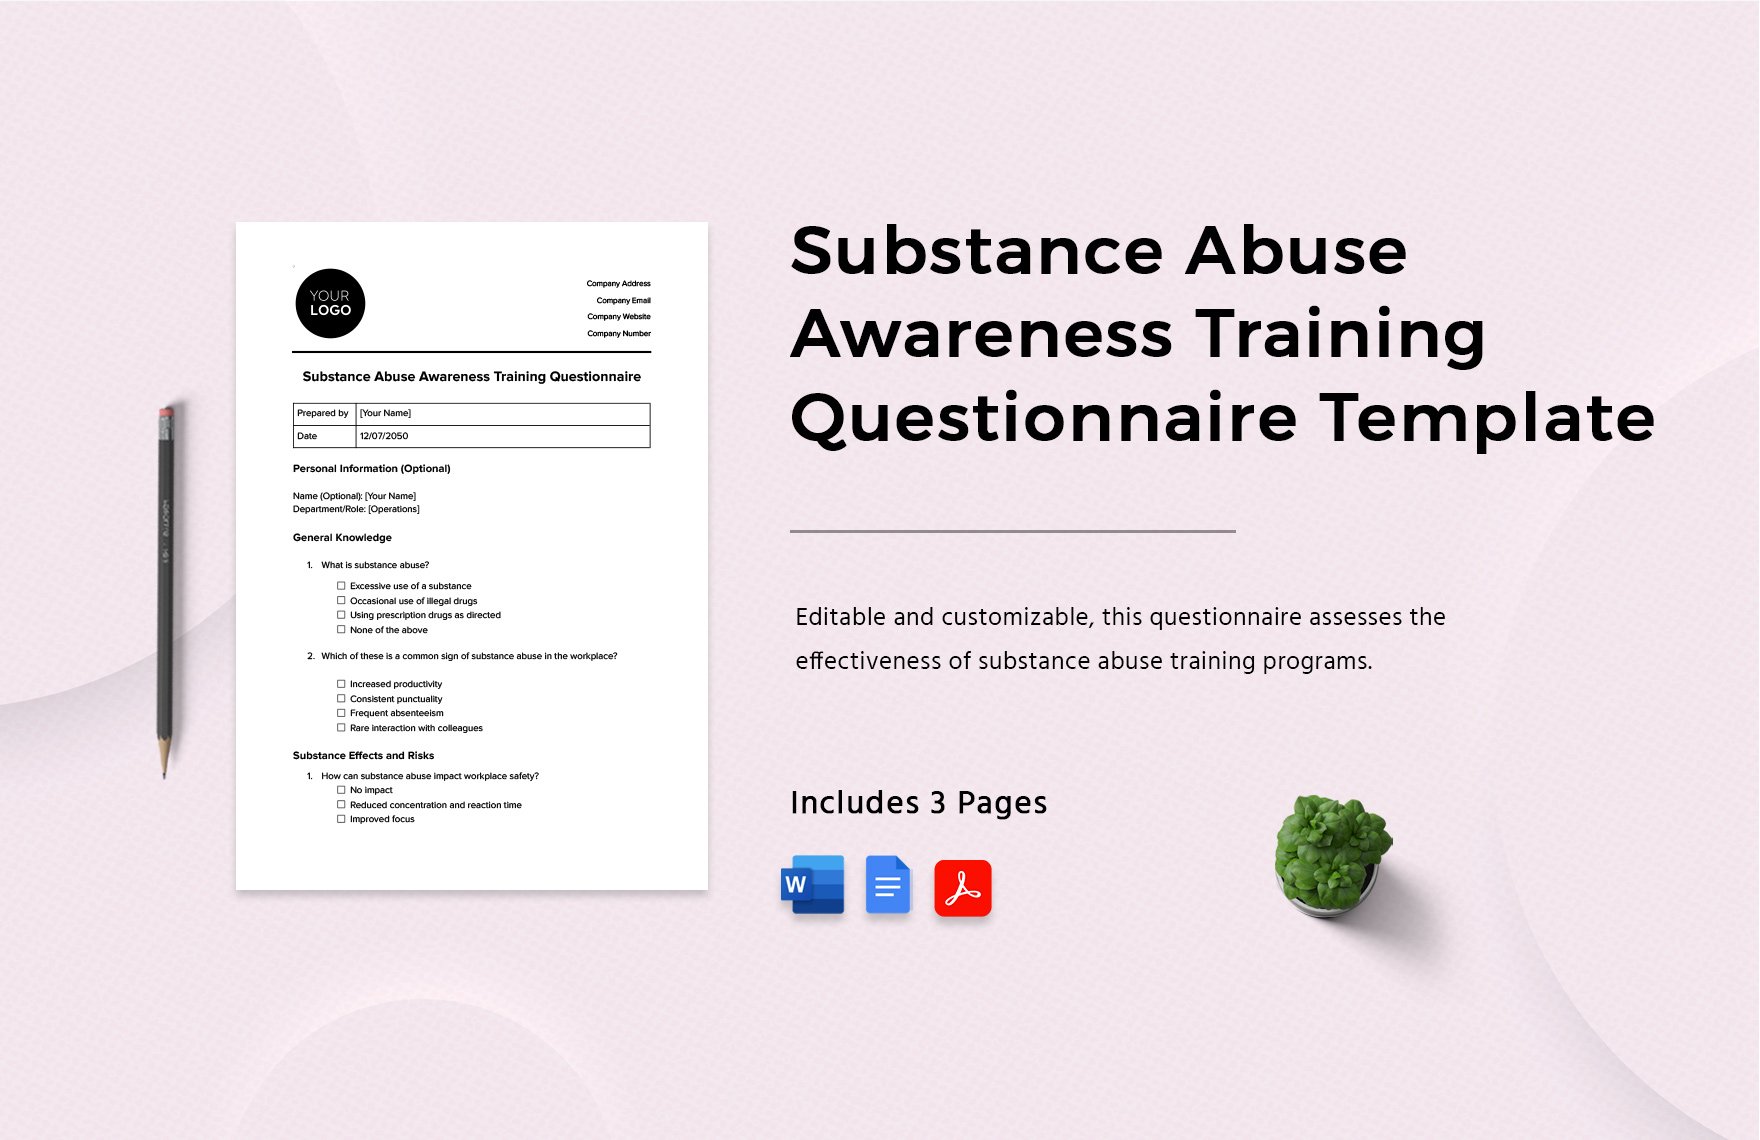 Substance Abuse Awareness Training Questionnaire Template